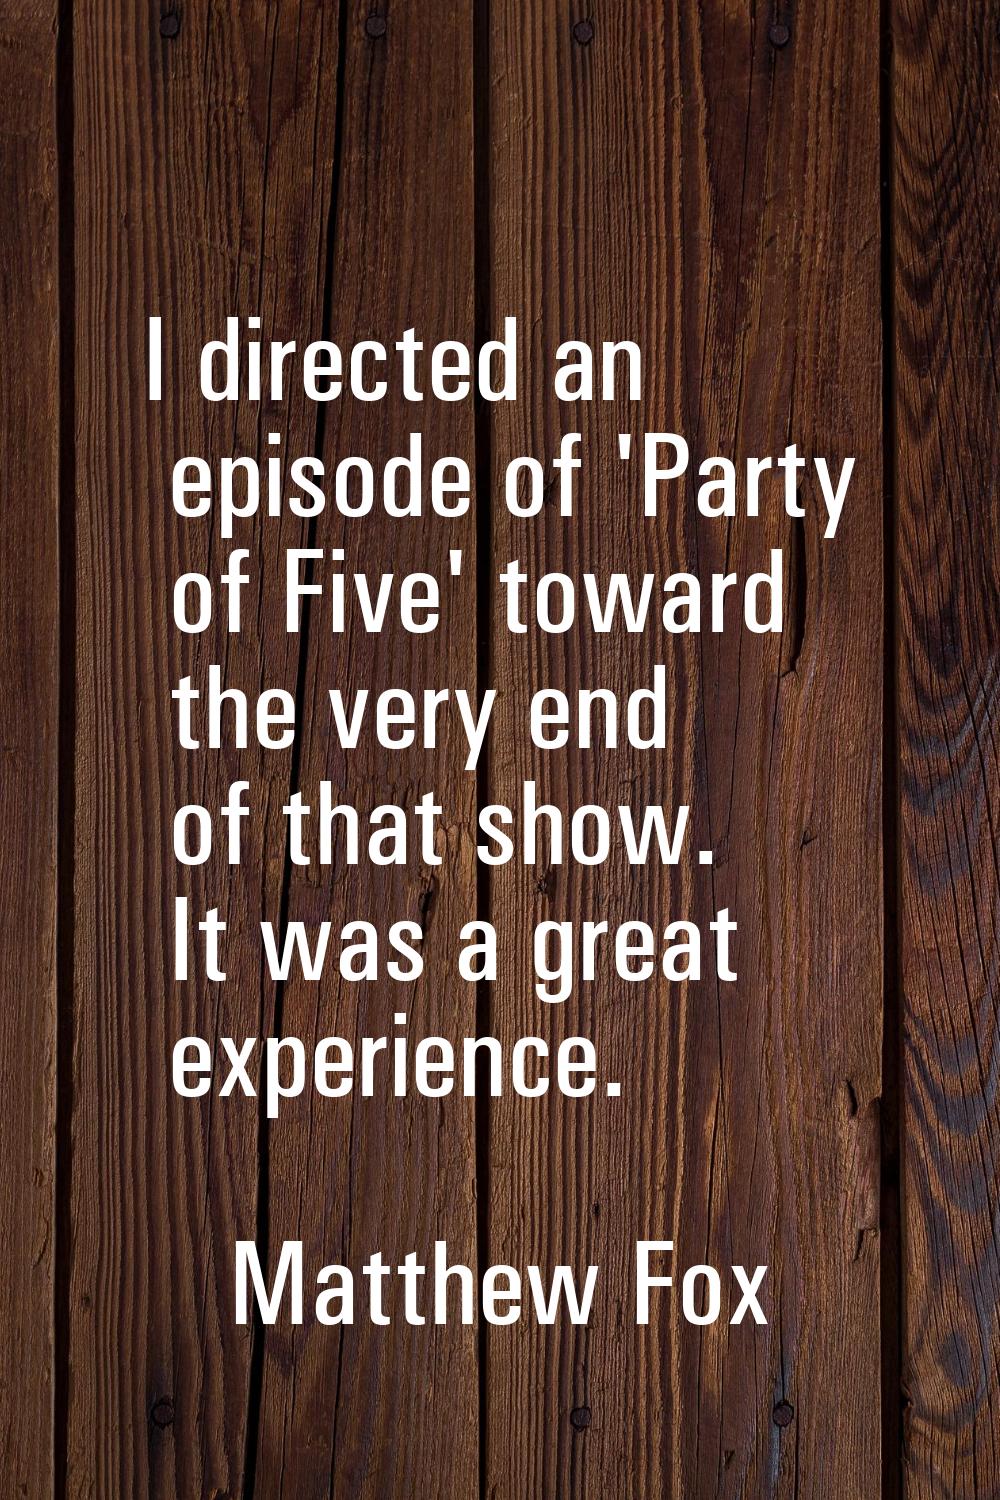 I directed an episode of 'Party of Five' toward the very end of that show. It was a great experienc